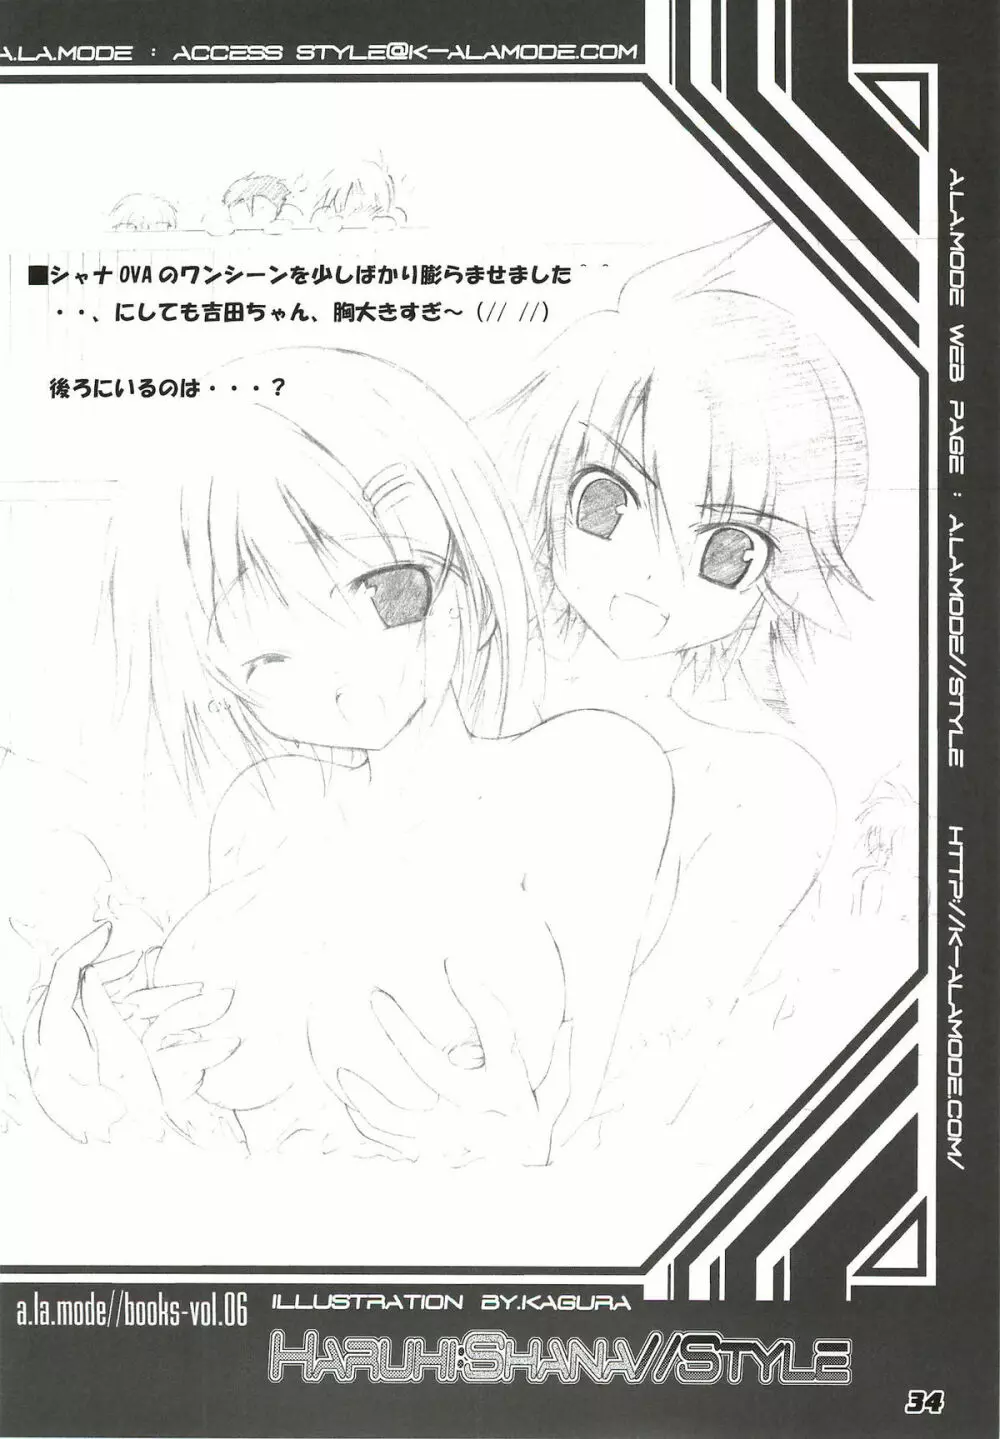 La Collection -Shana／／Style- Page.34